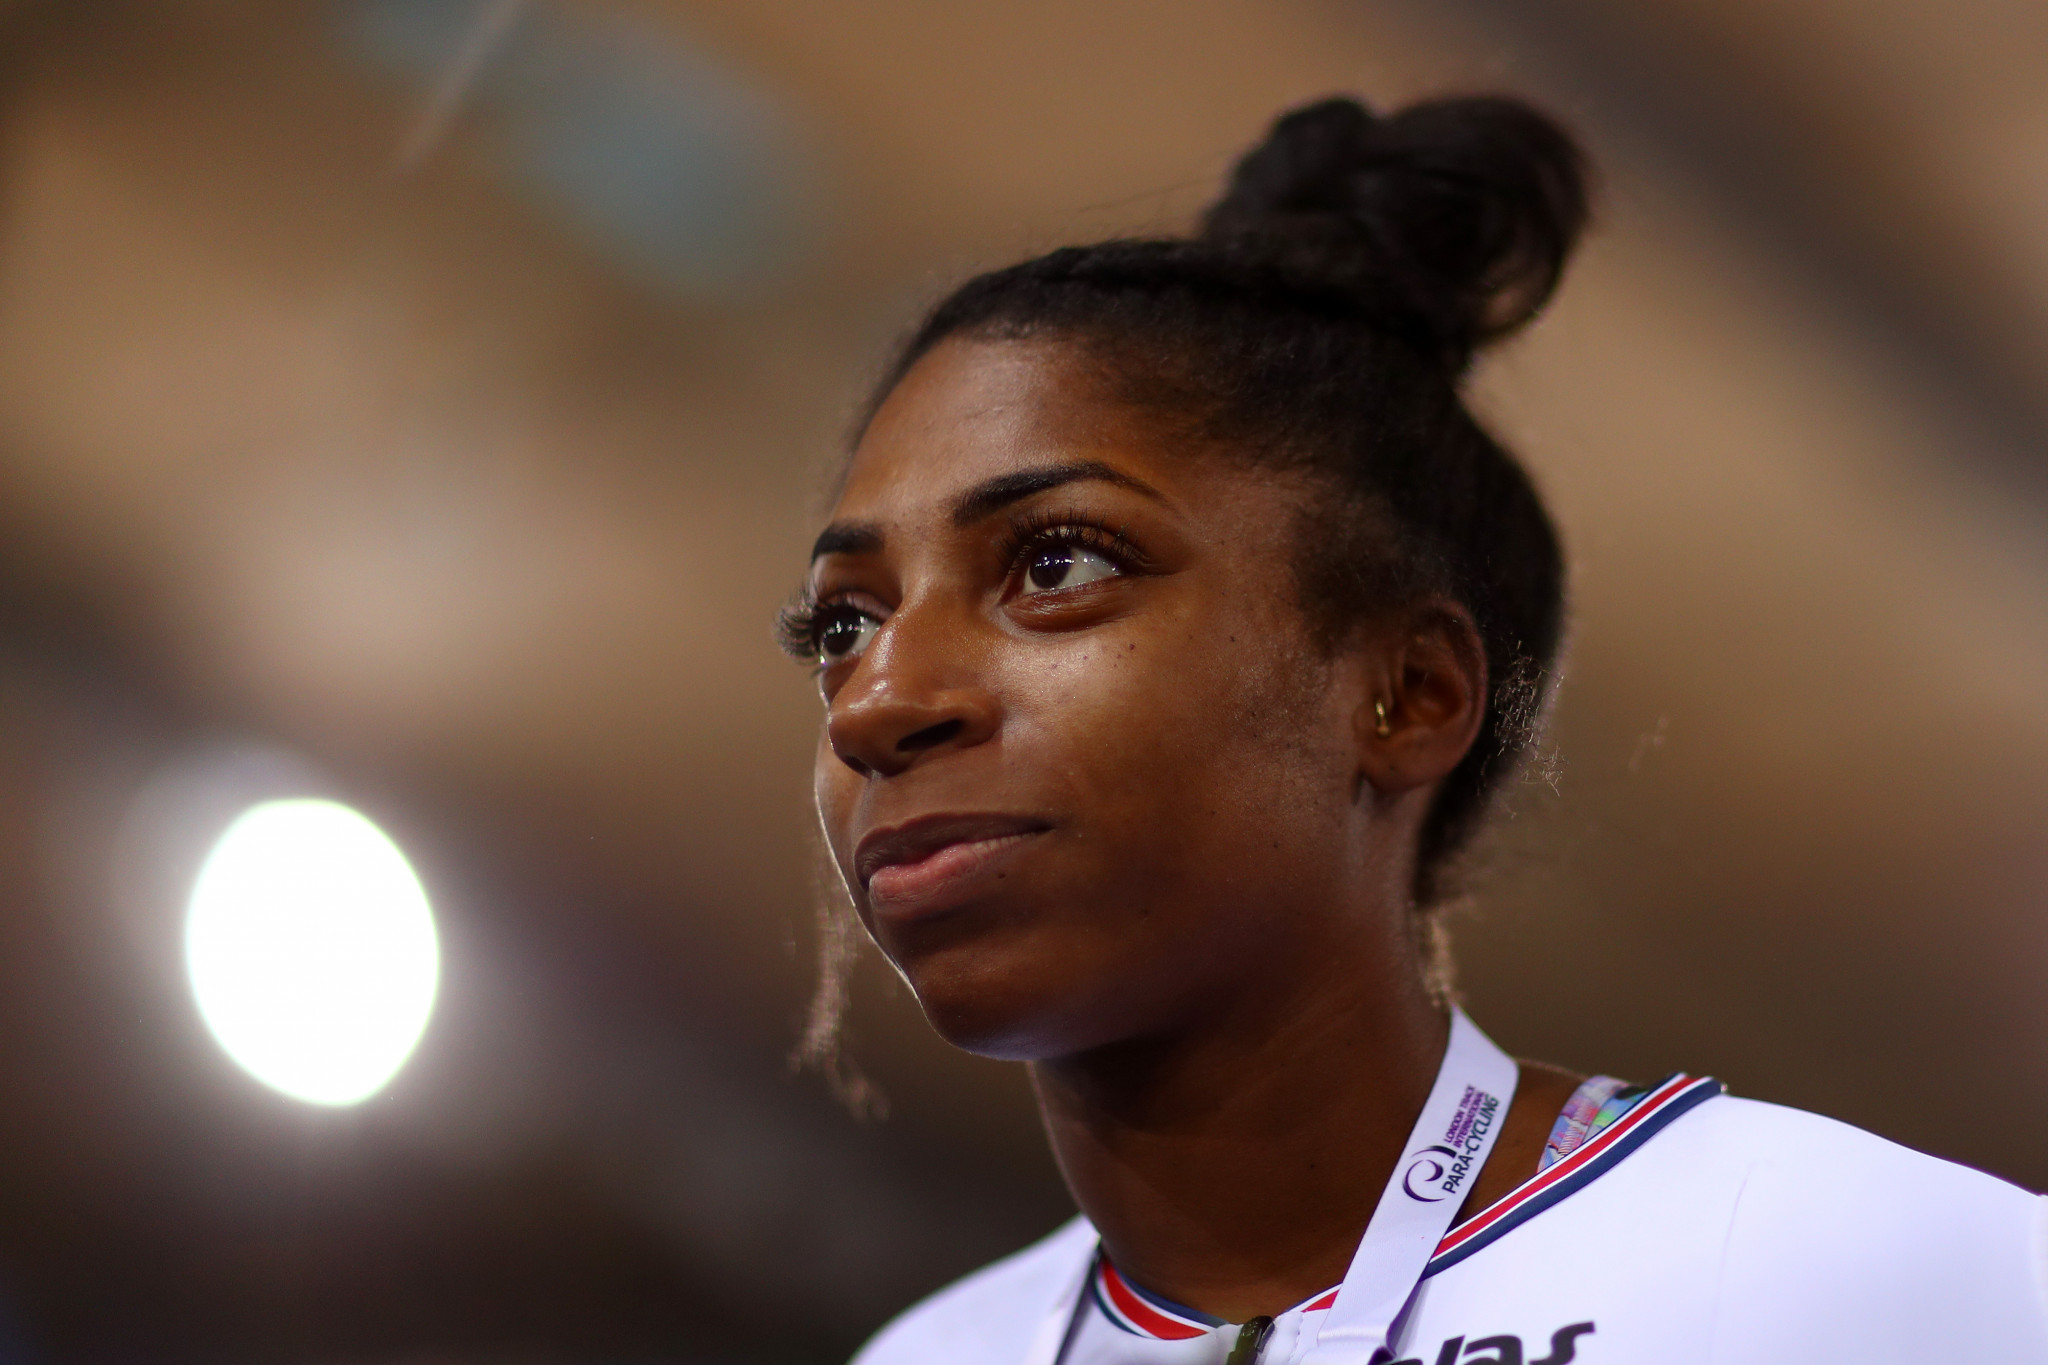 Four-time Paralympic medallist Kadeena Cox is among the athletes named on Team Citi for Tokyo 2020 ©Getty Images